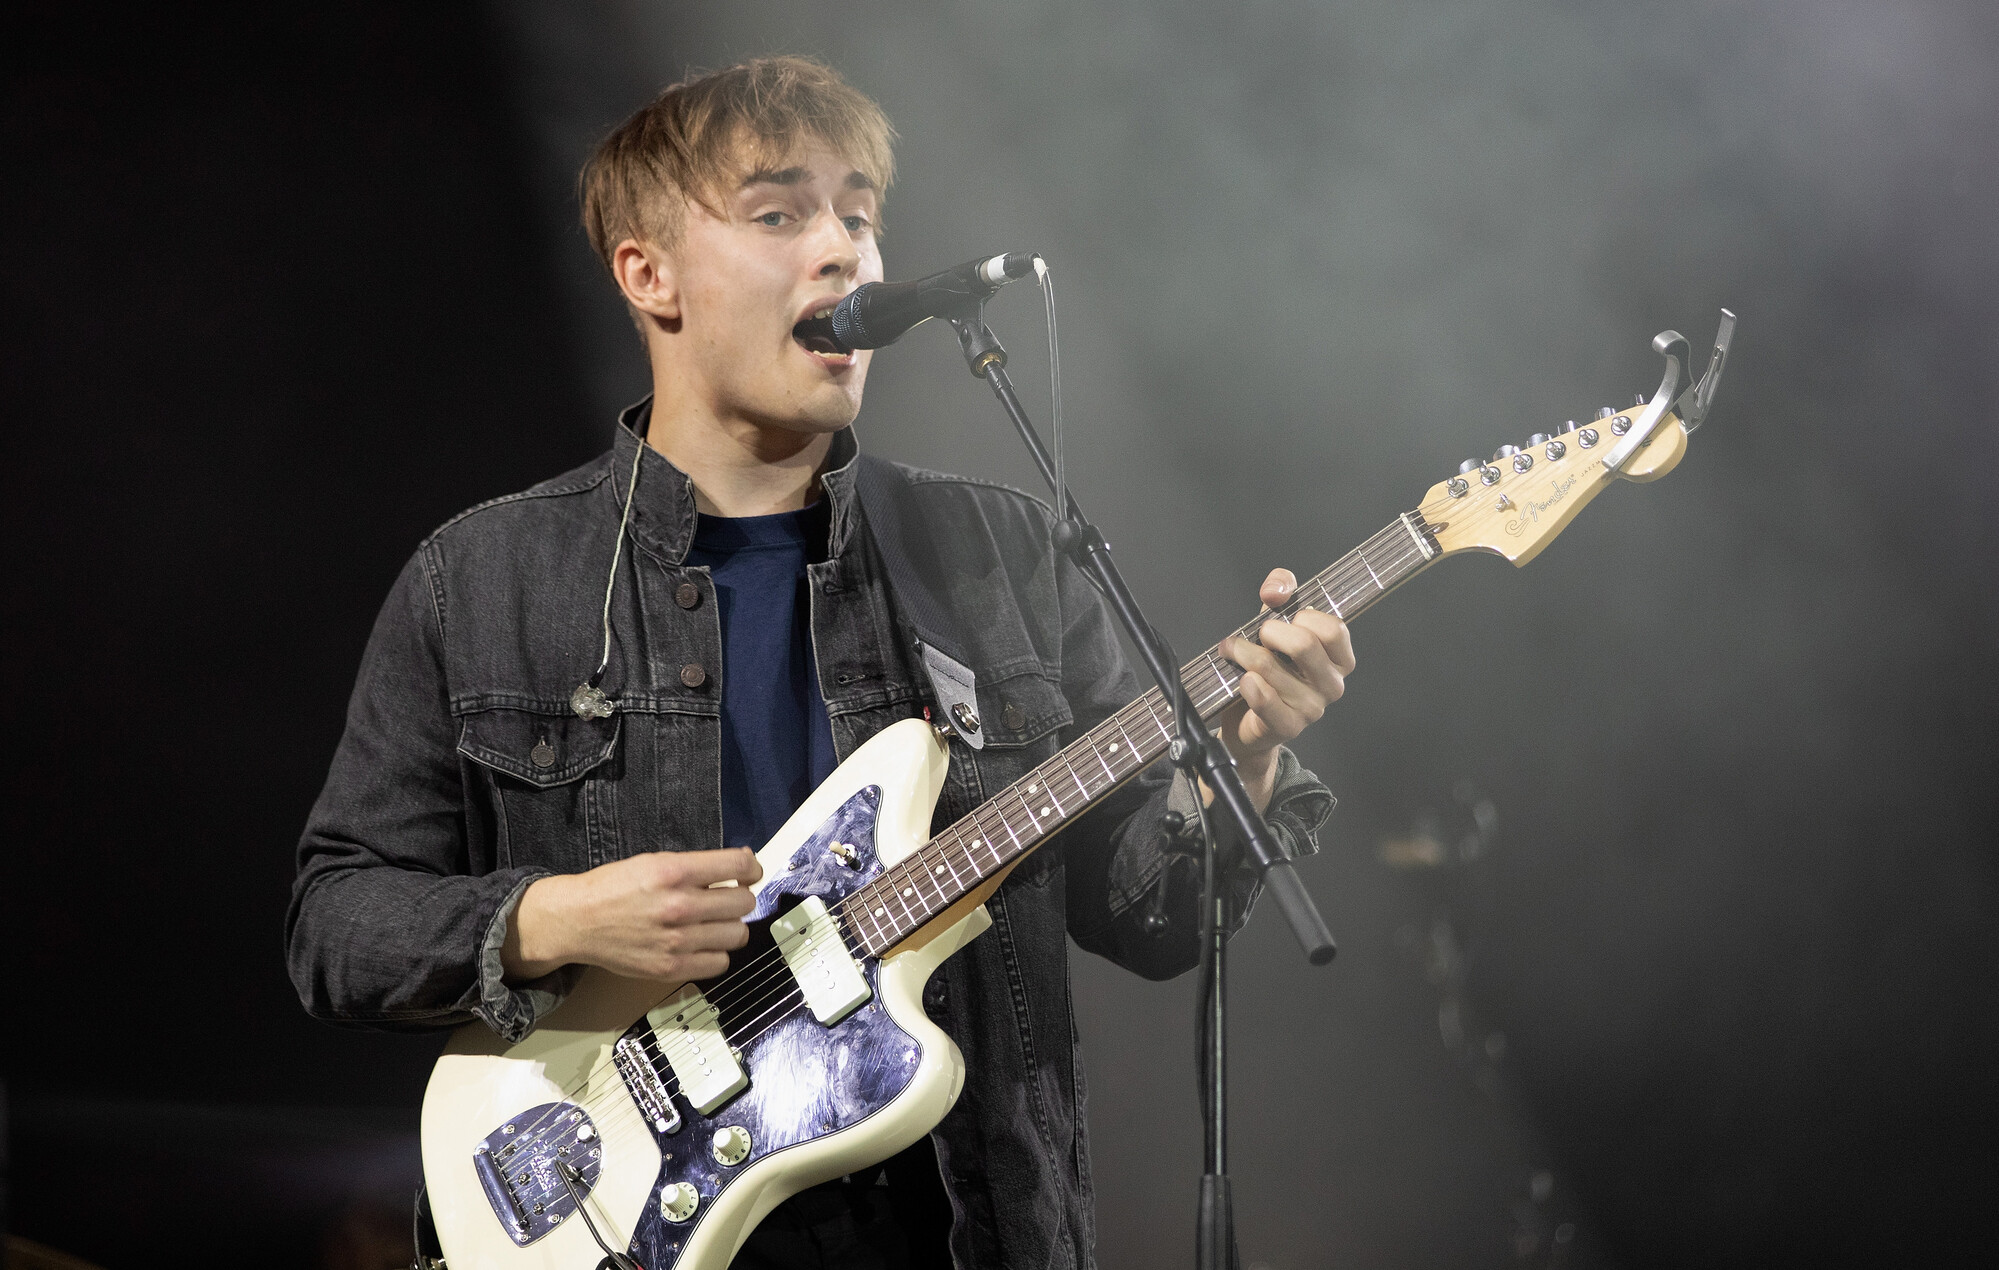 Sam Fender: Signed to Polydor Records in June 2018, An English singer-songwriter. 2000x1270 HD Wallpaper.